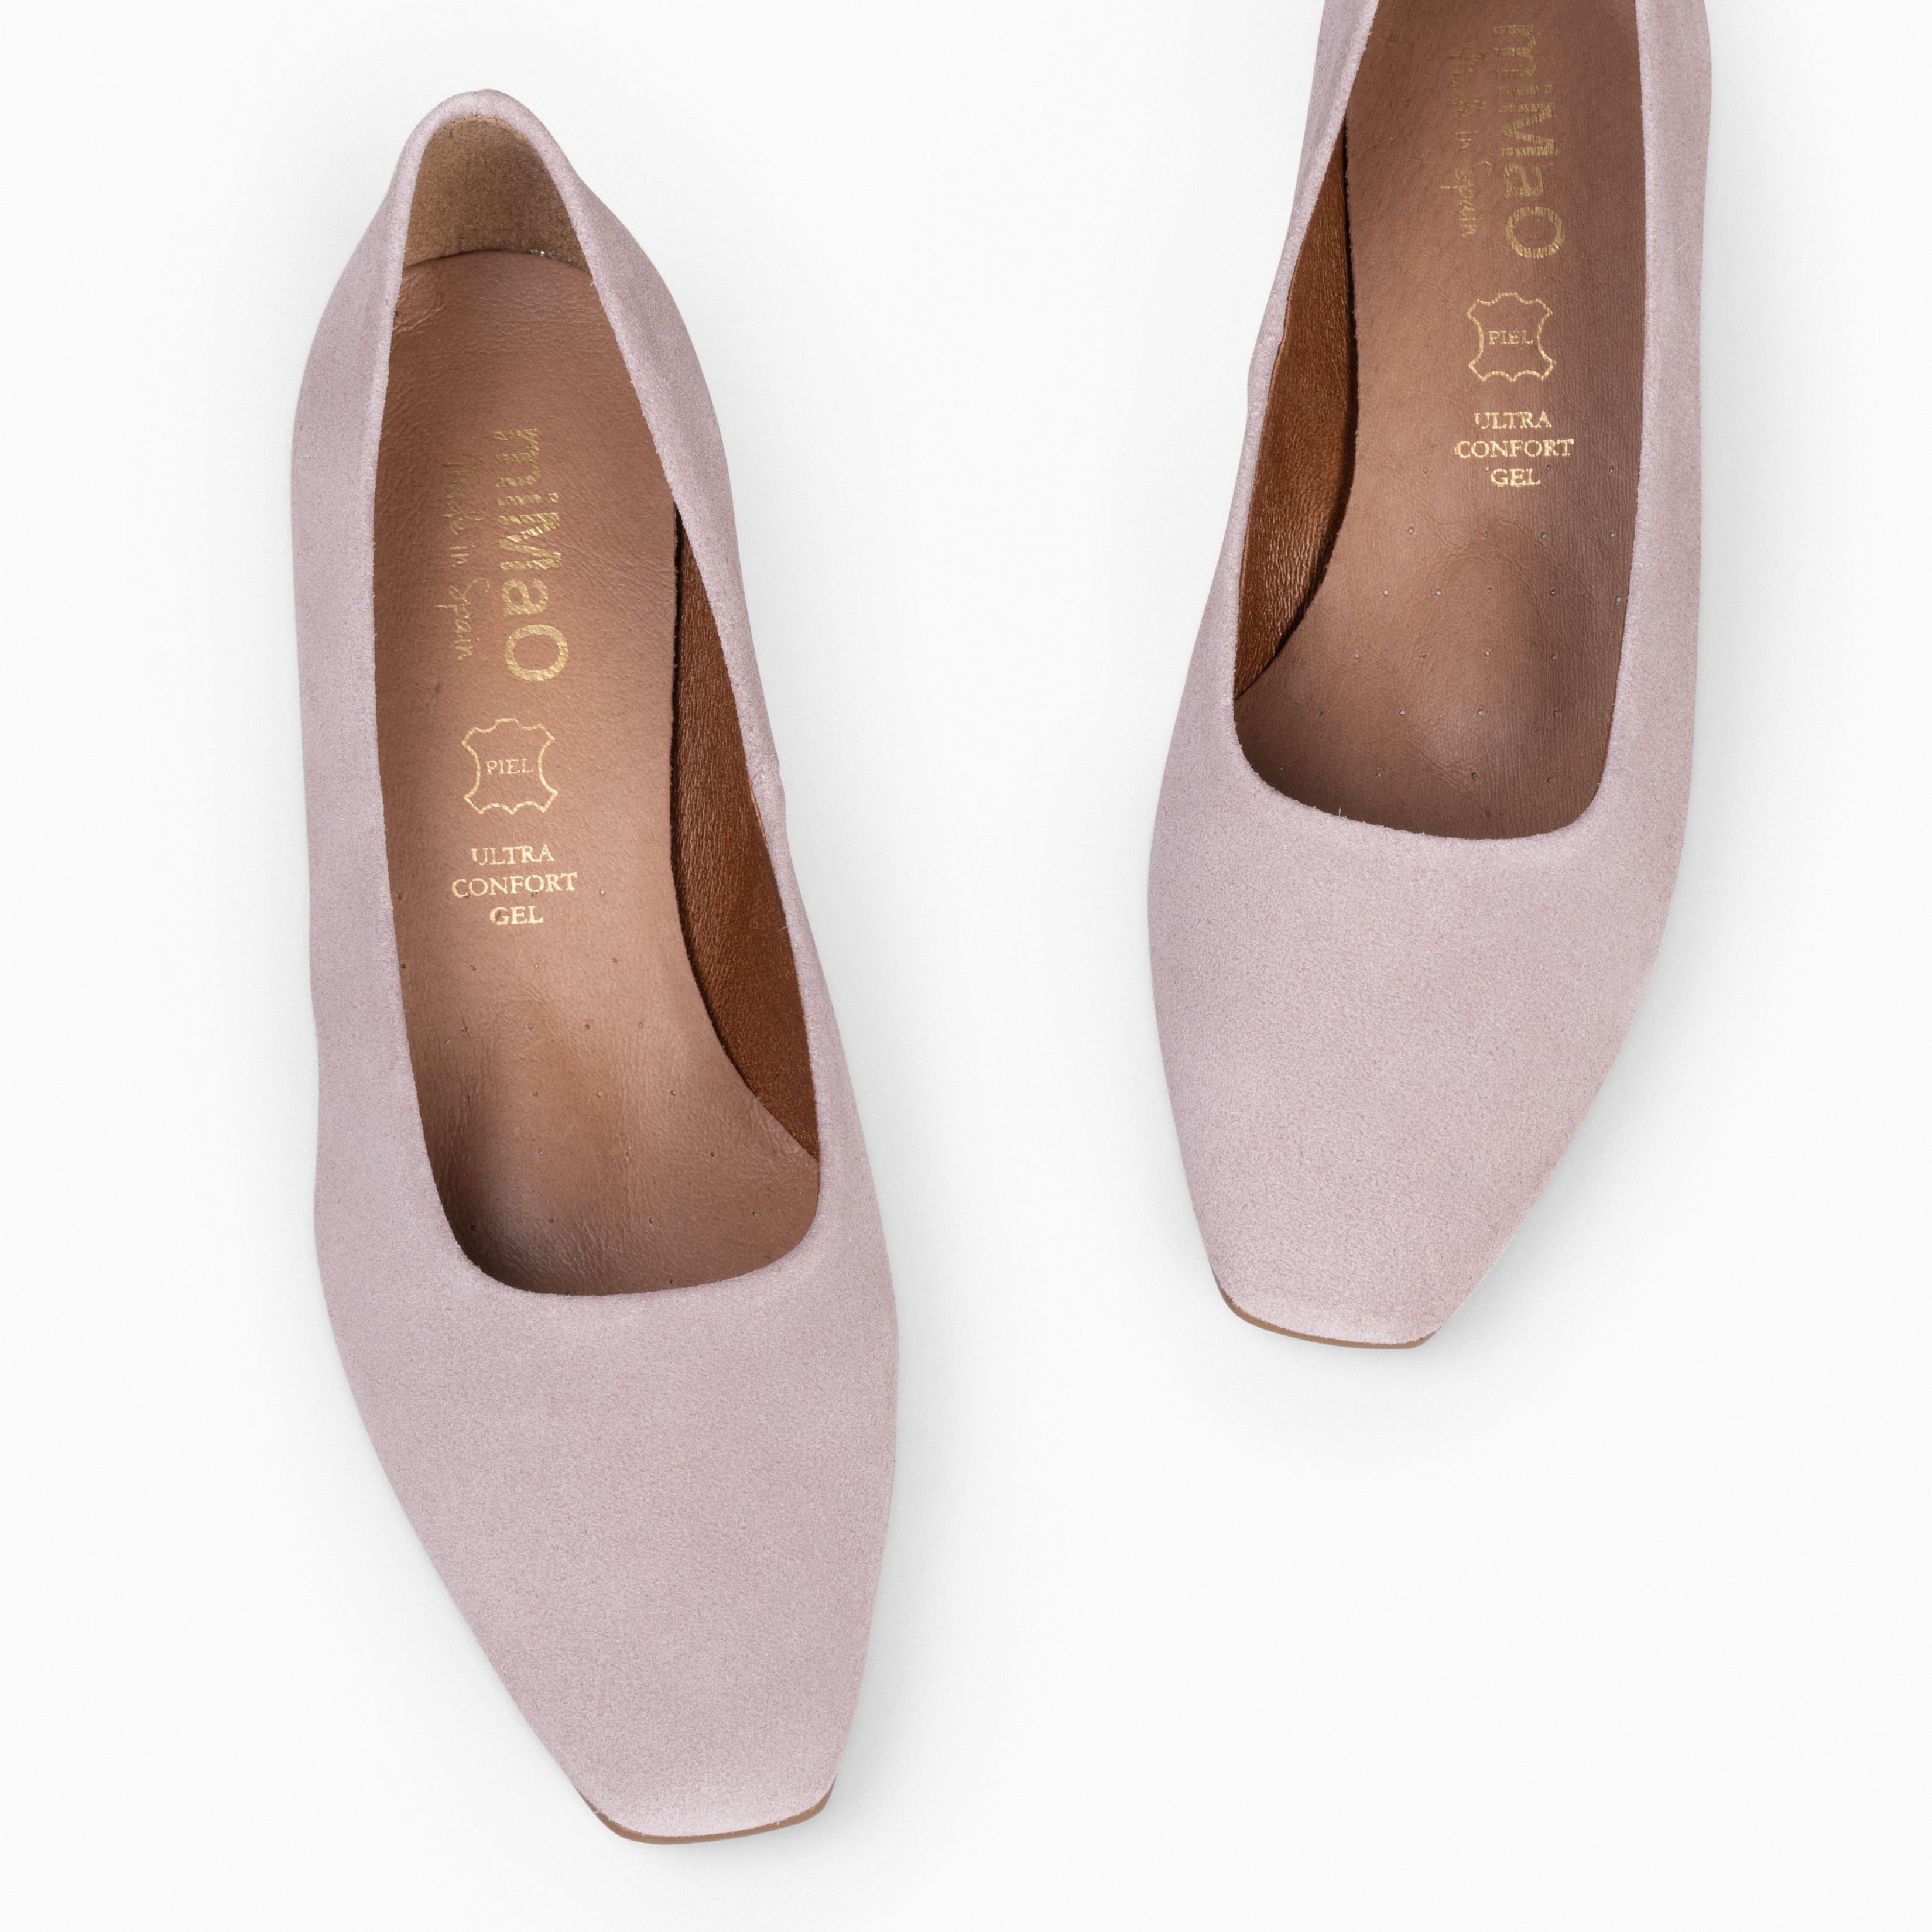 URBAN LADY – NUDE suede leather low heels 